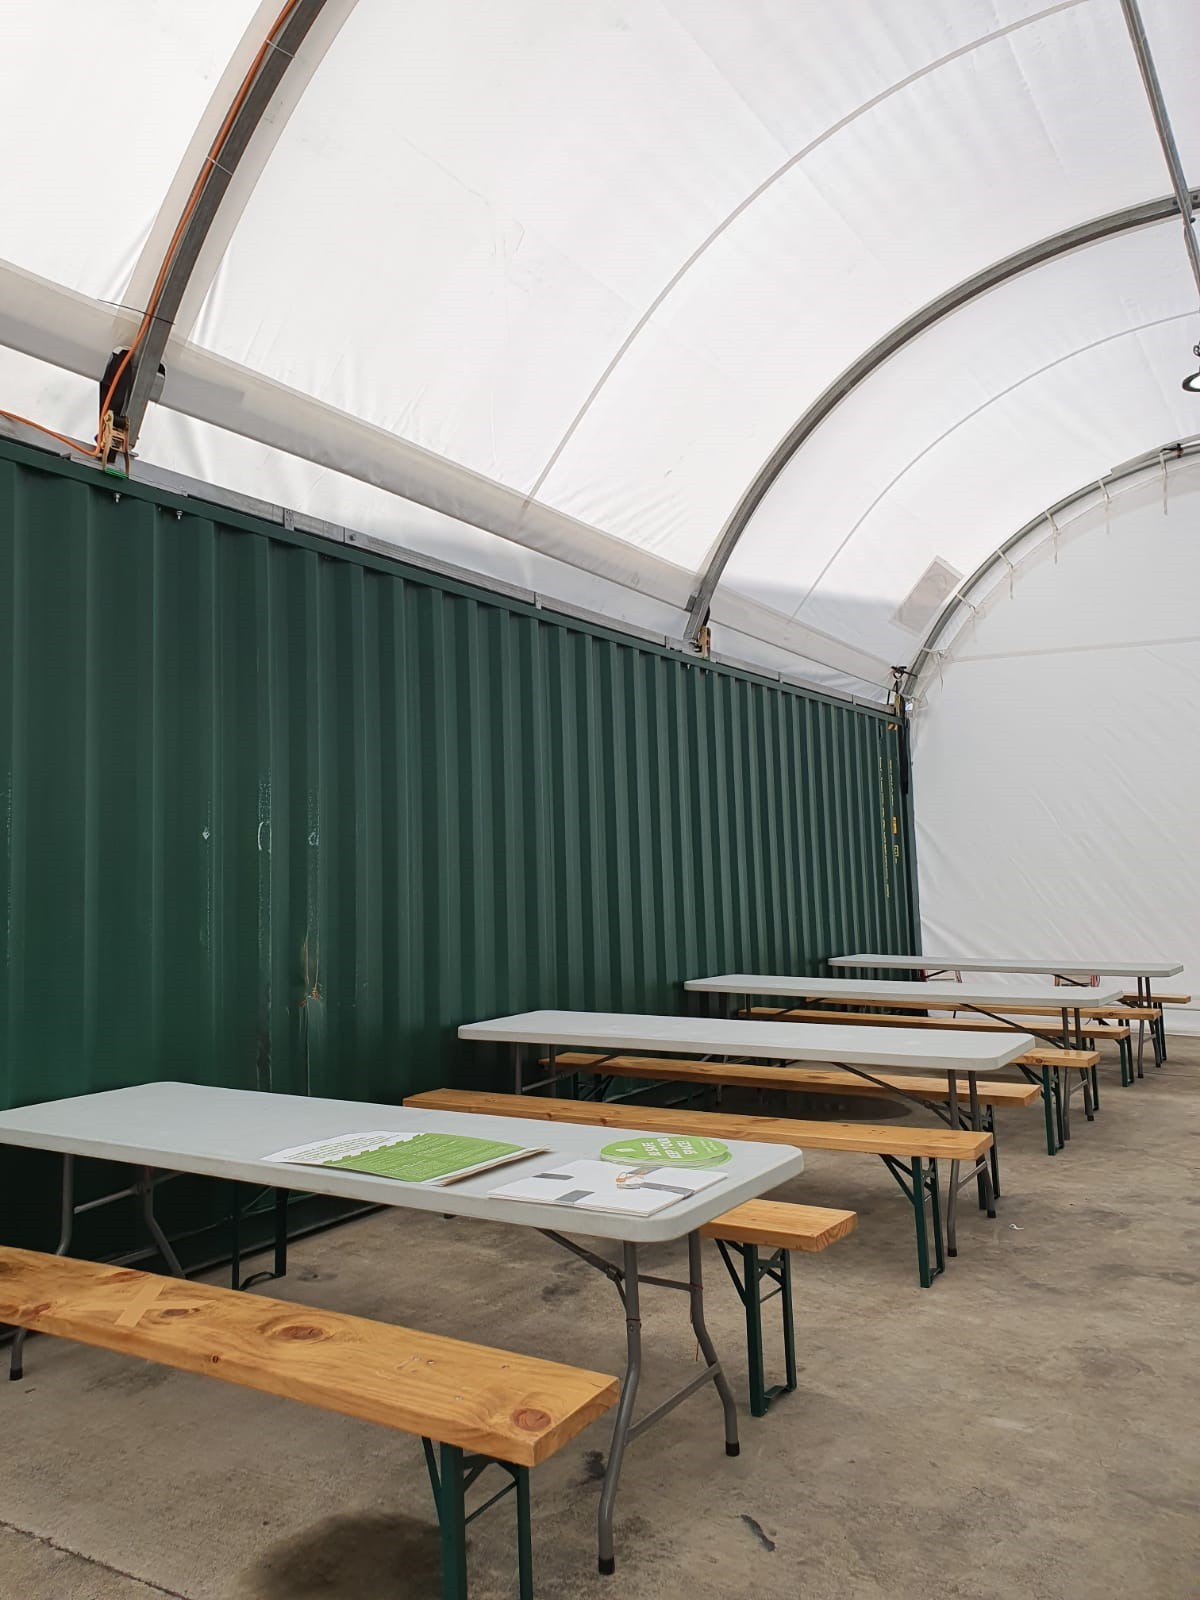 We teamed up with SmartShelters to create a container solution for My Food Bag in order to help it meet increasing demand during the COVID-19 crisis.